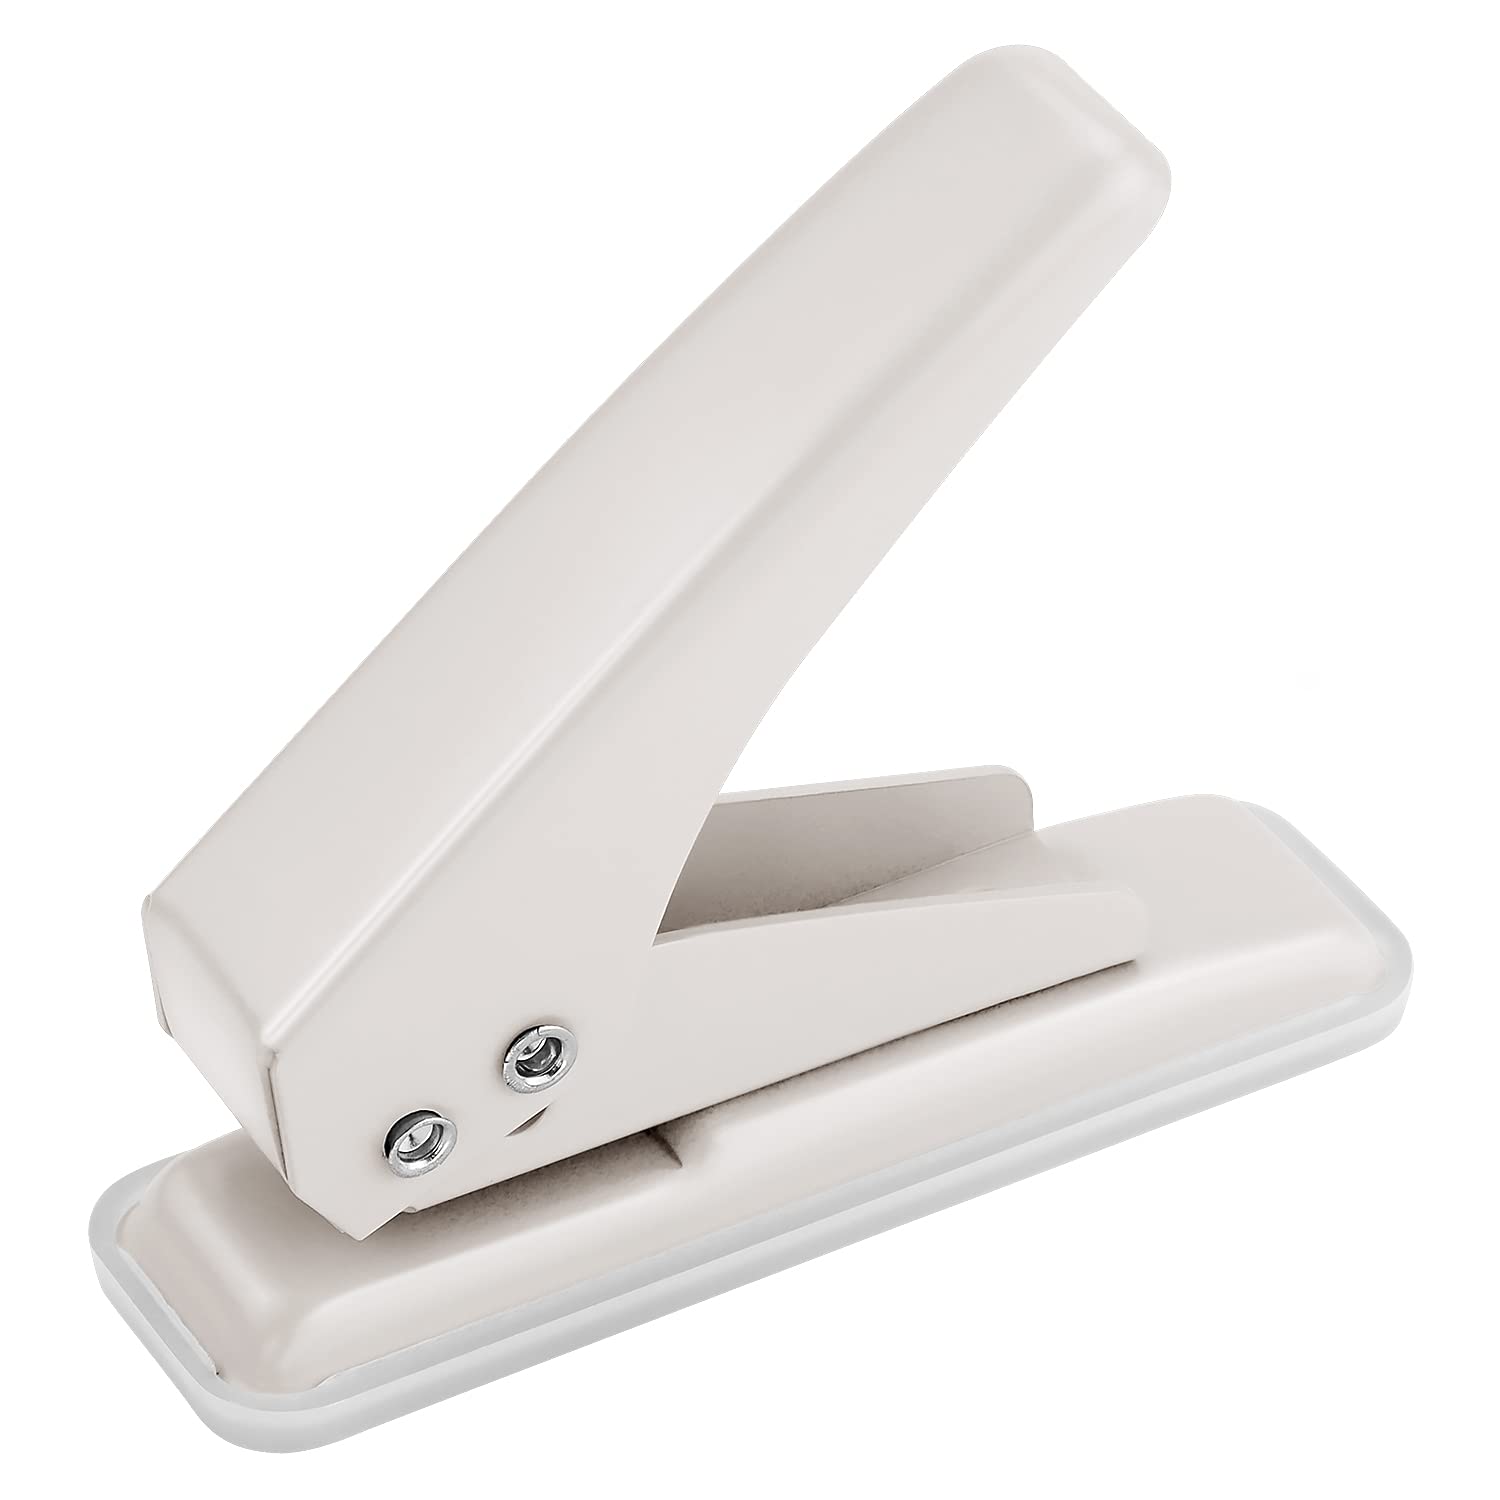 Hutou Single Handheld 1/4 Inches Hole Punch, 20 Sheet Paper Hole